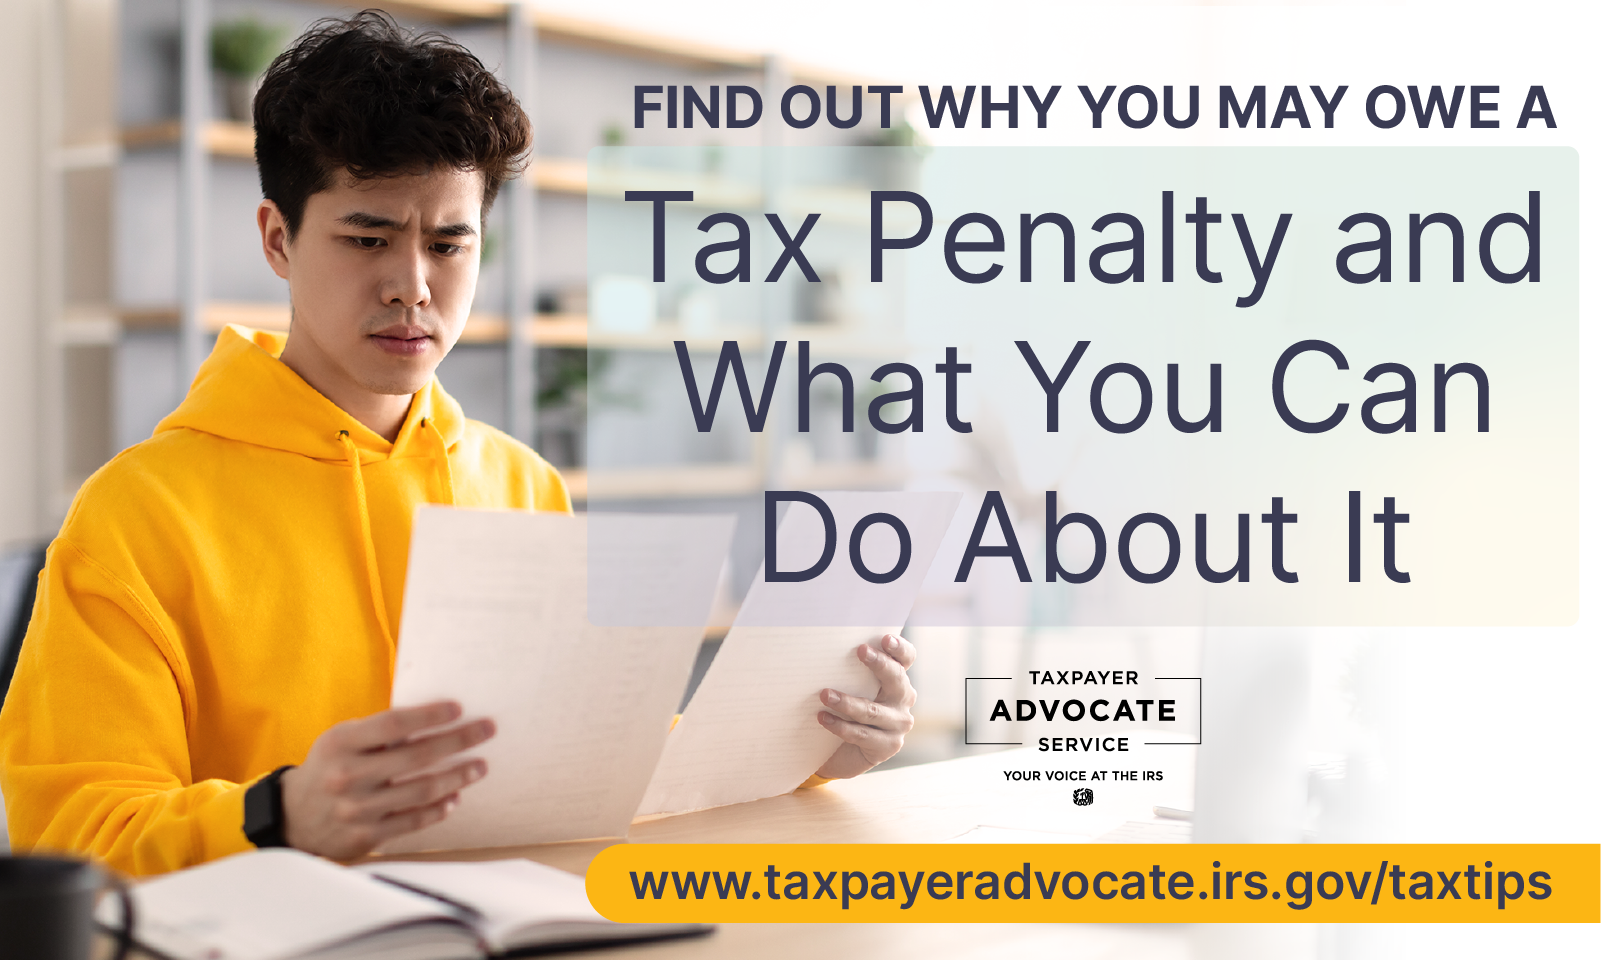 Young man wearing a yellow sweatshirt and black watch sitting at a desk, open notebook on desk, reviewing documents; Find out why you may owe a tax penalty and what you can do about it; Taxpayer Advocate Service logo; www.taxpayeradvocate.irs.gov/taxtips